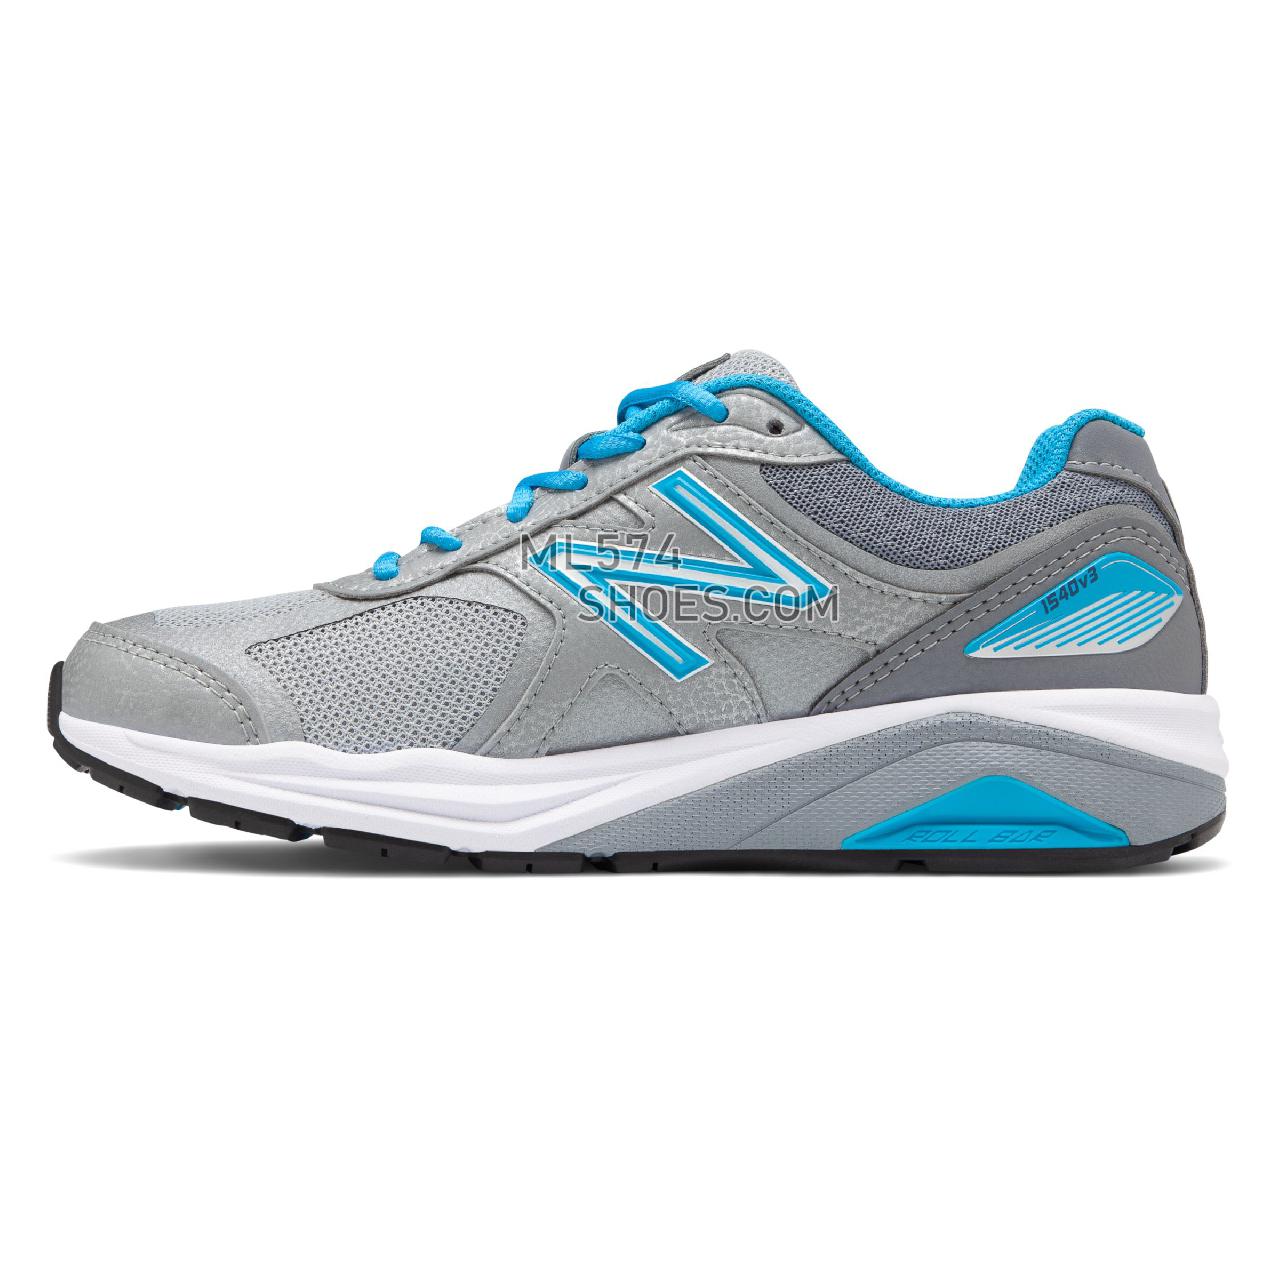 New Balance Made in US 1540v3 - Women's Motion Control Running - Silver with Polaris - W1540SP3